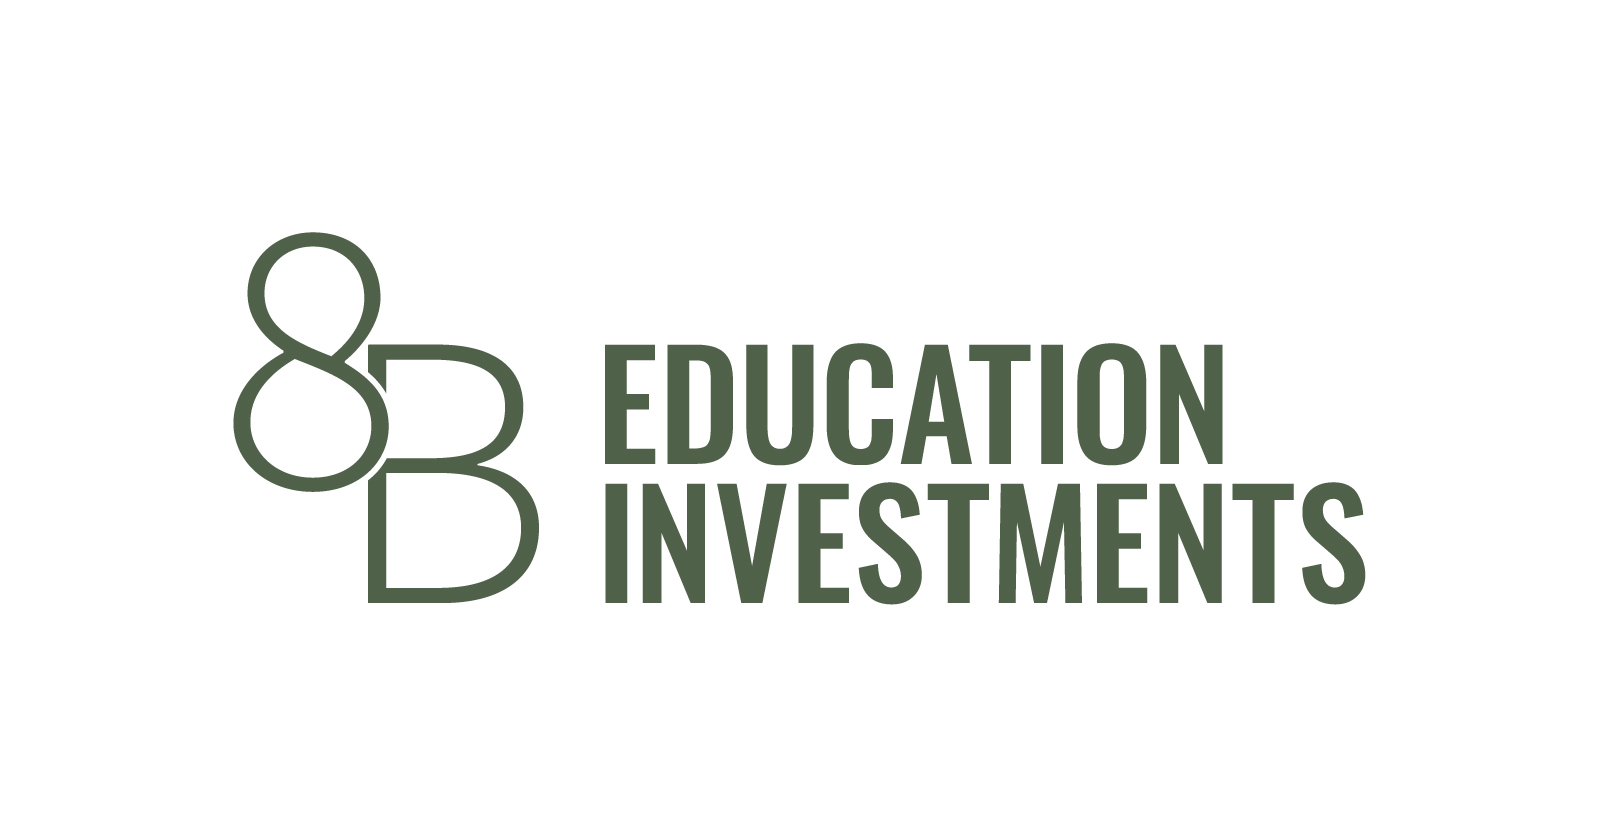 8B Education Investments, First Financing Platform Enabling African Students to Study in Global Universities, Welcomes the Roots’ Lead Singer and Entrepreneur Tariq “Black Thought” Trotter to Board Position